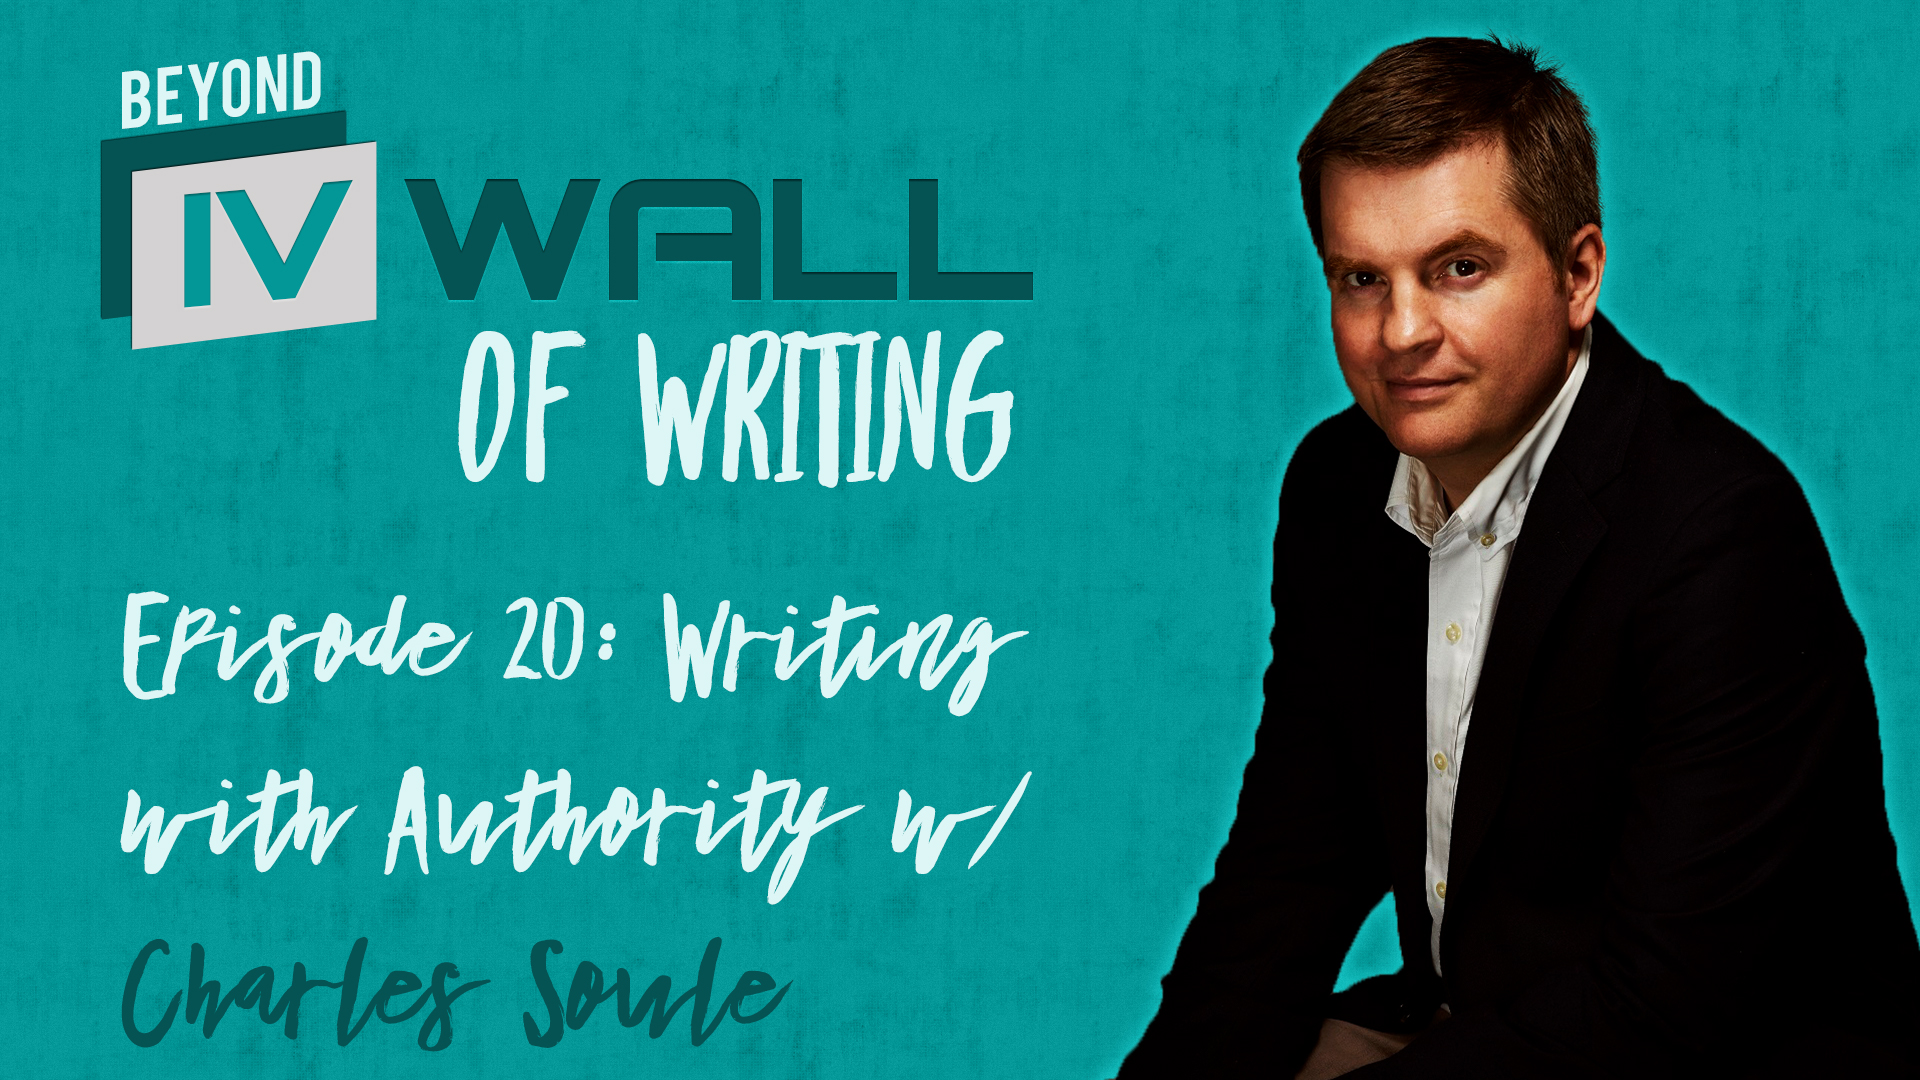 Beyond_IVWall_of_Writing_Episode_20-_Writing_with_Authority_with_Charles_Soule_Blog